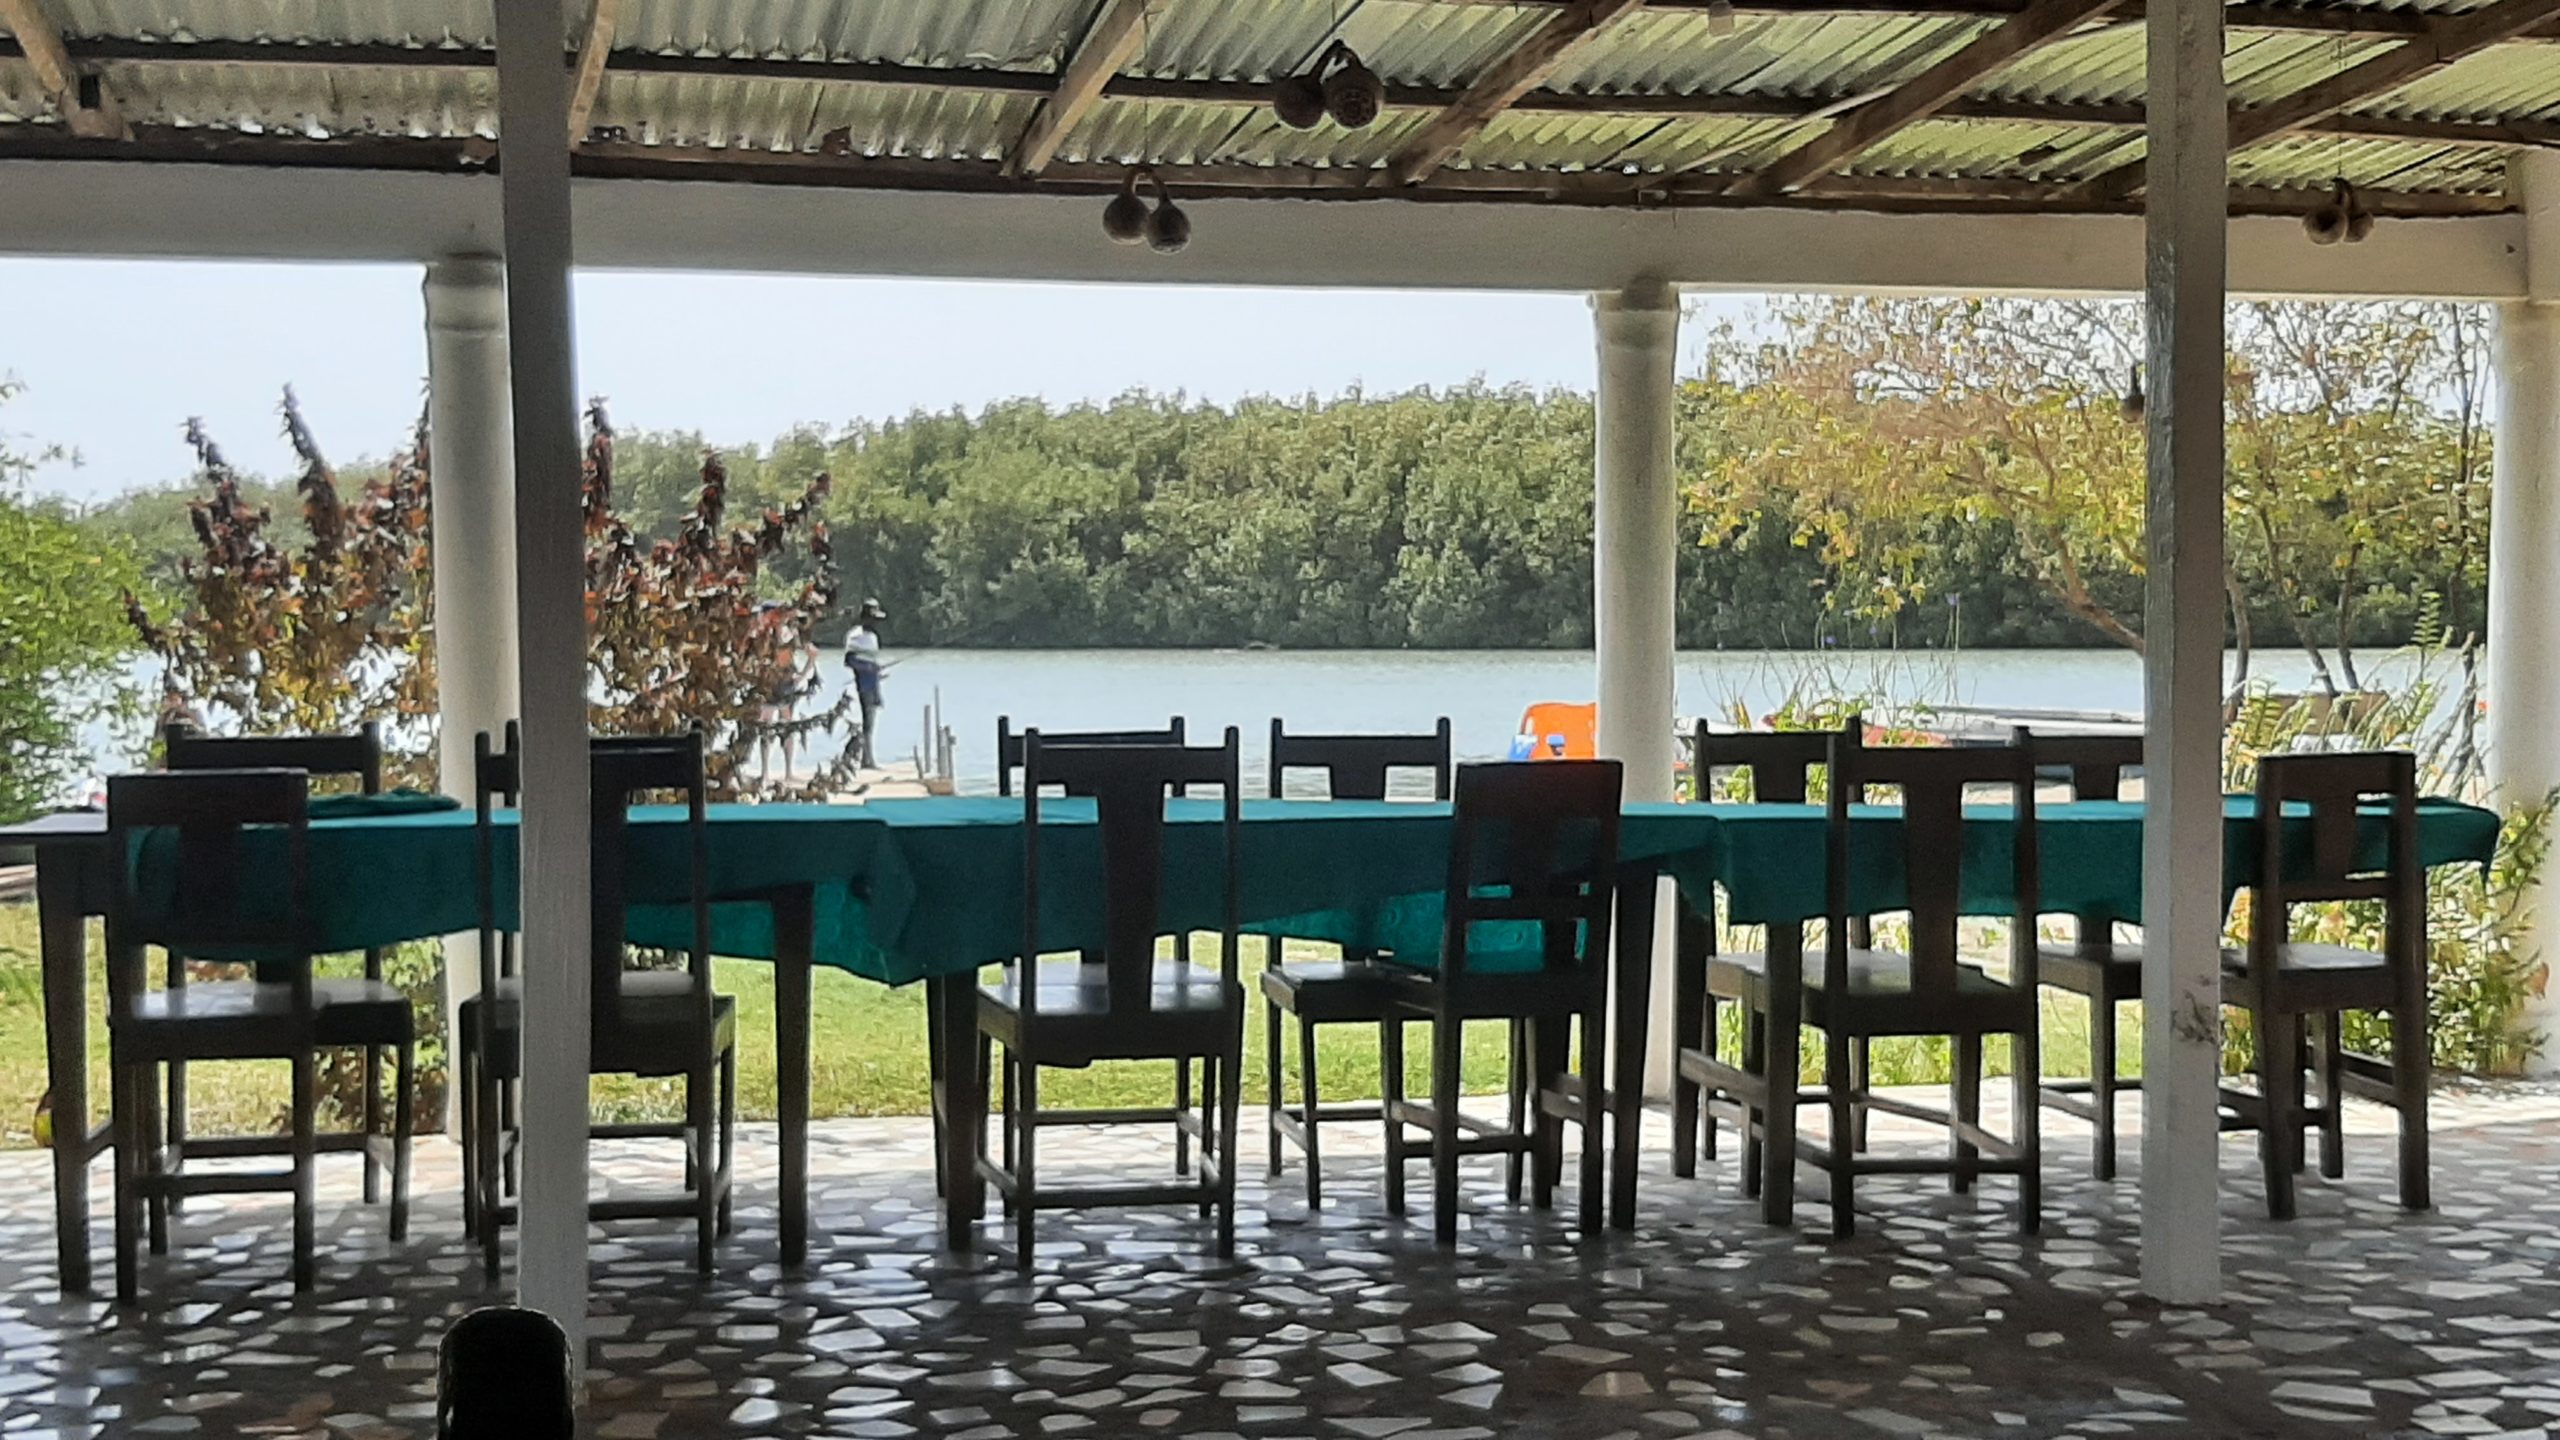 StalaRestaurantRiver scaled - THE GAMBIA: IN THE RIVER DELTA OF THE IDYLLIC ALLAHEIN-RIVER AND DIRECTLY ON THE ATLANTIC, THE STALA ADVENTURE LODGE BECKONS WITH 'PETS ❤️-WELCOME'